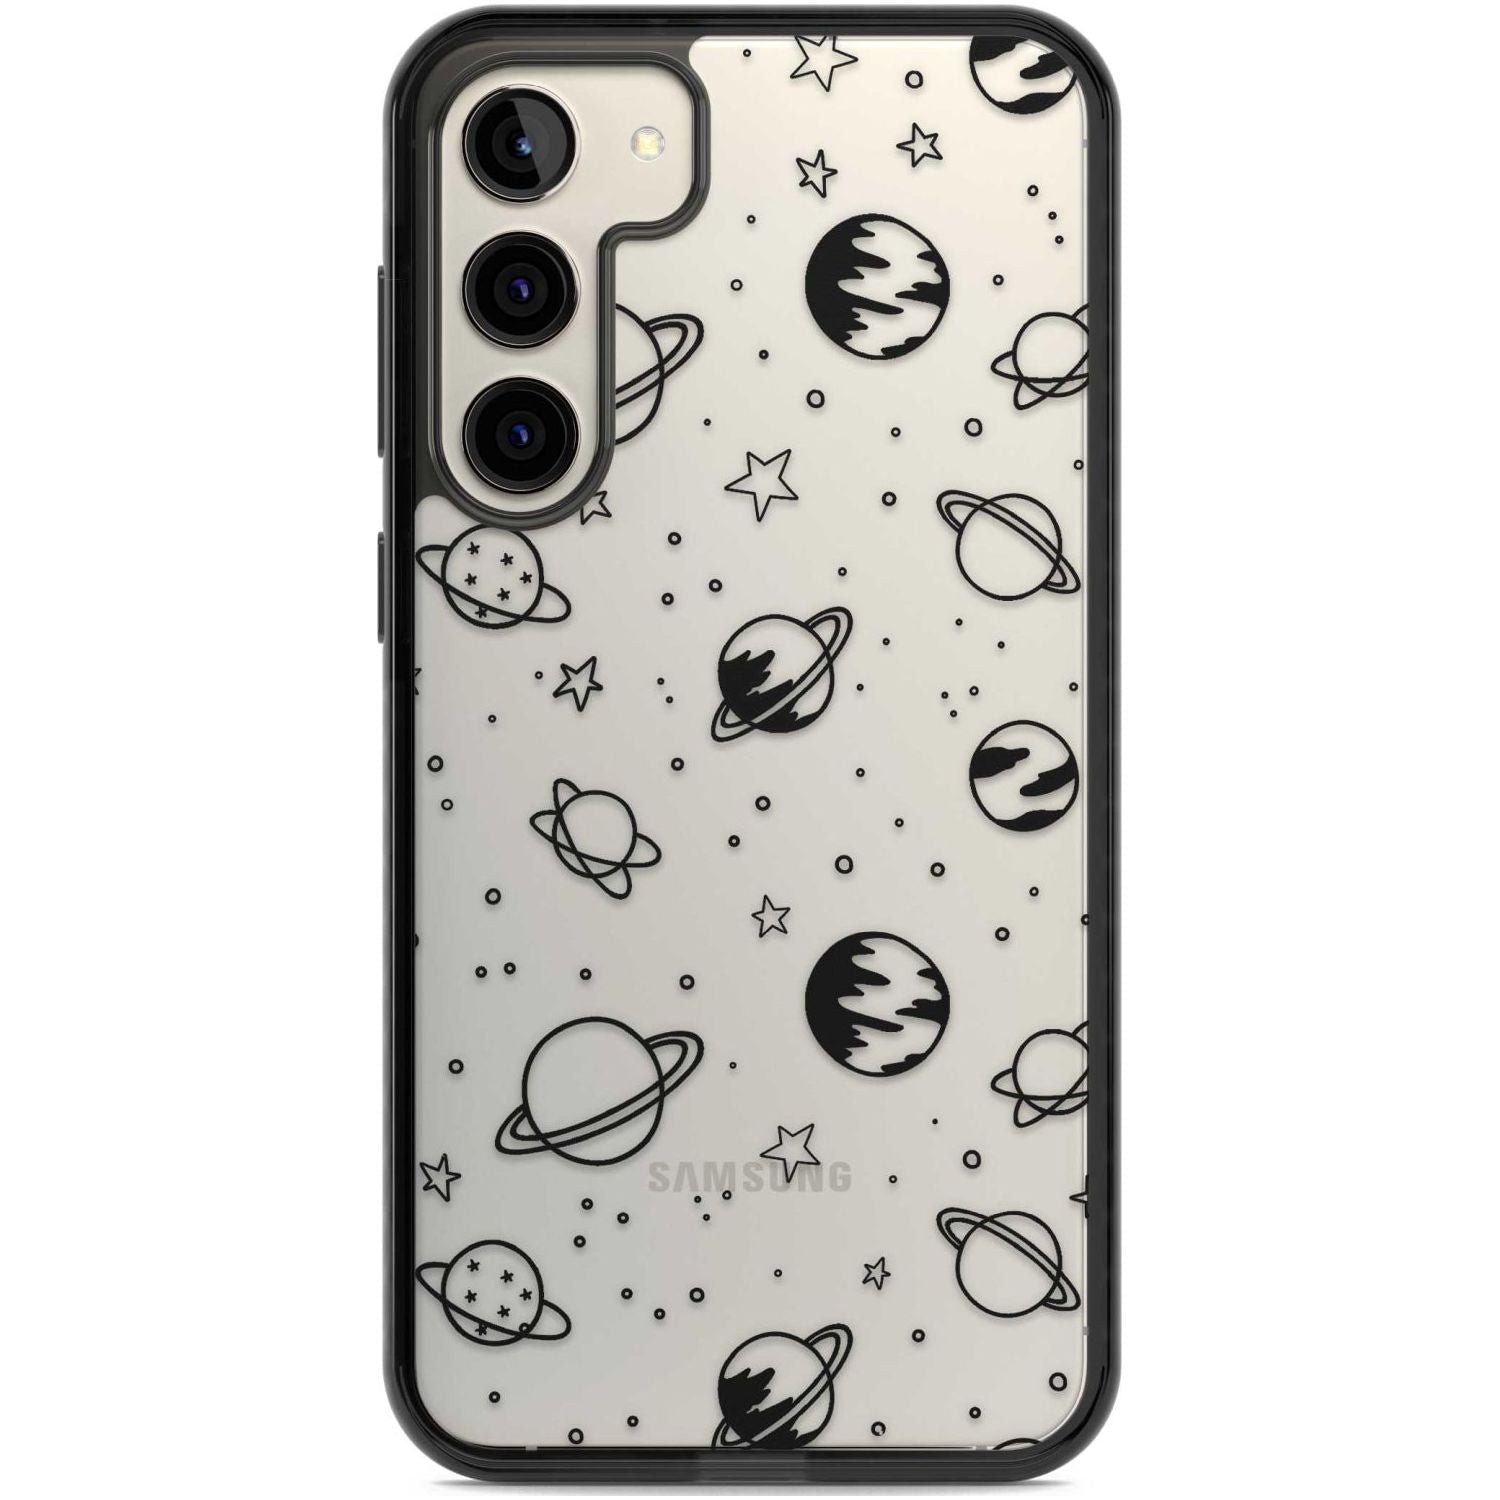 Cosmic Outer Space Design Black on Clear